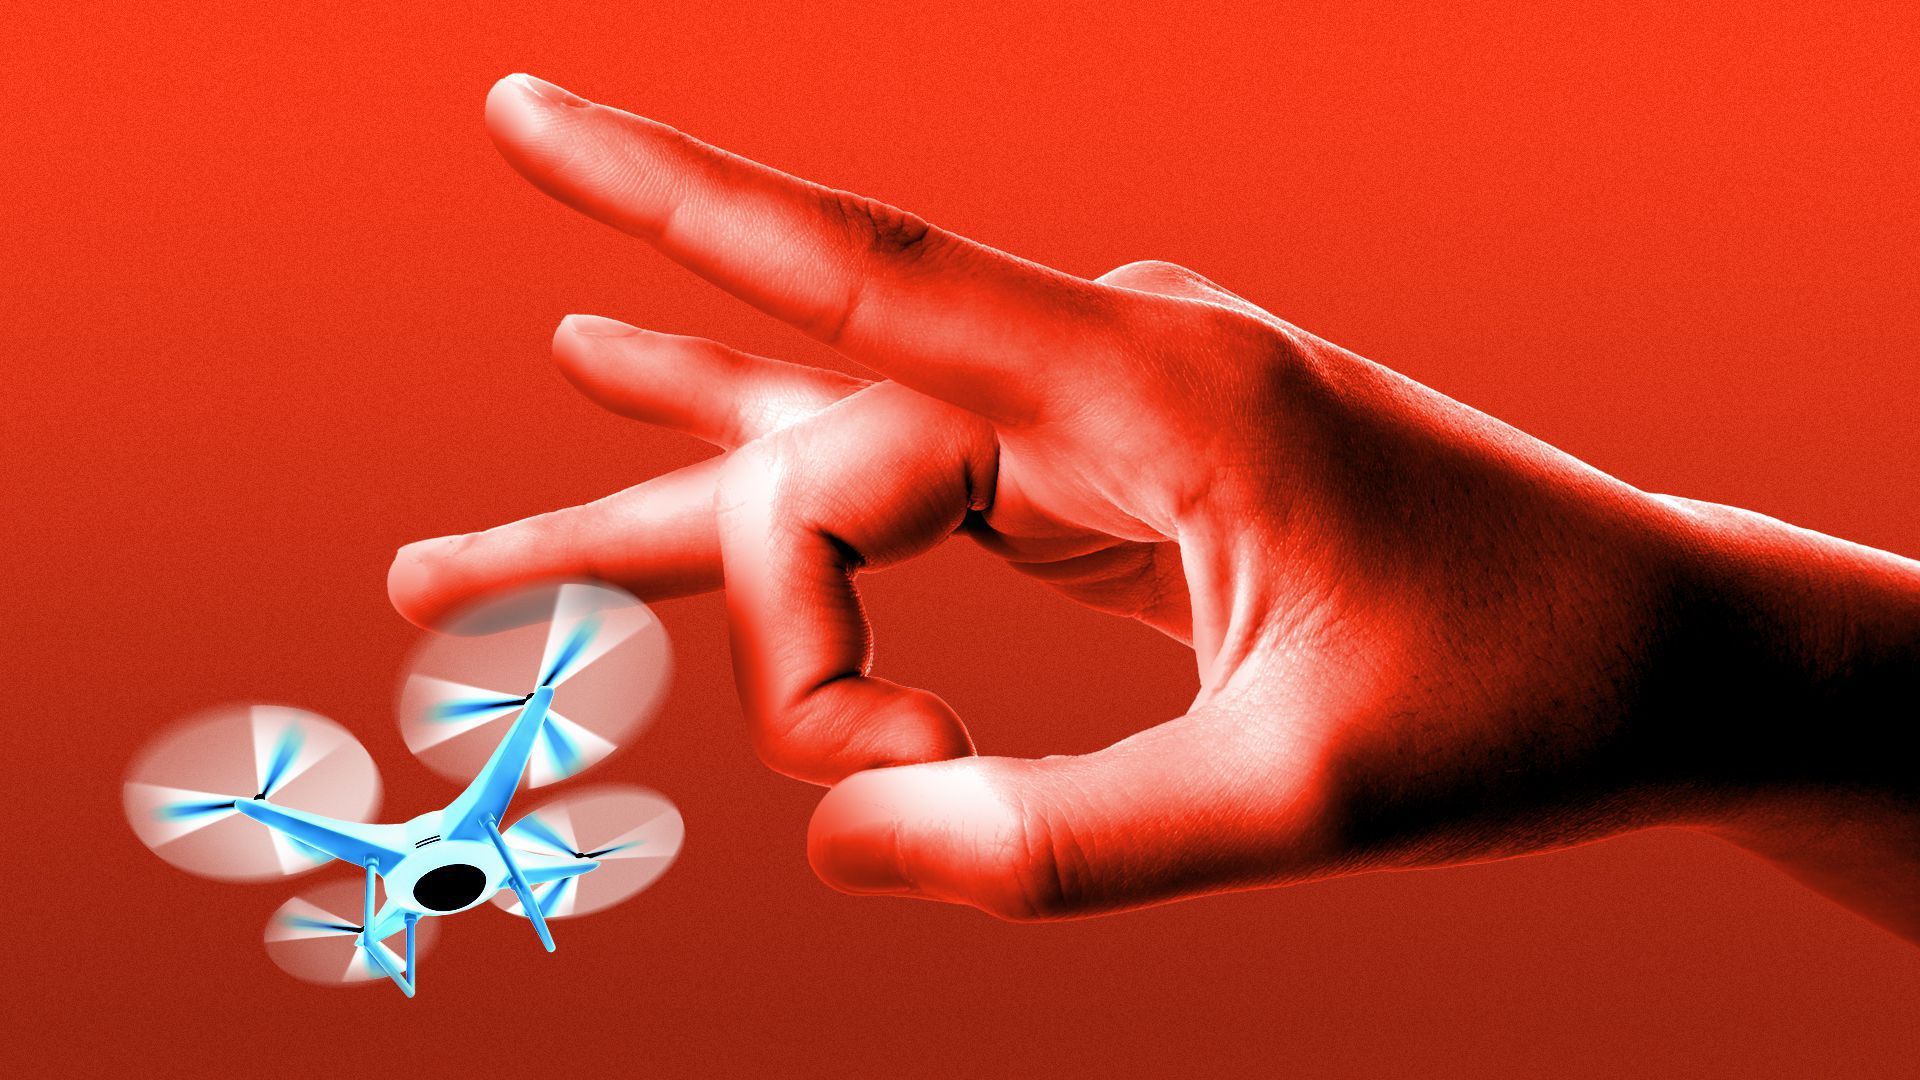 A hand flicking a drone